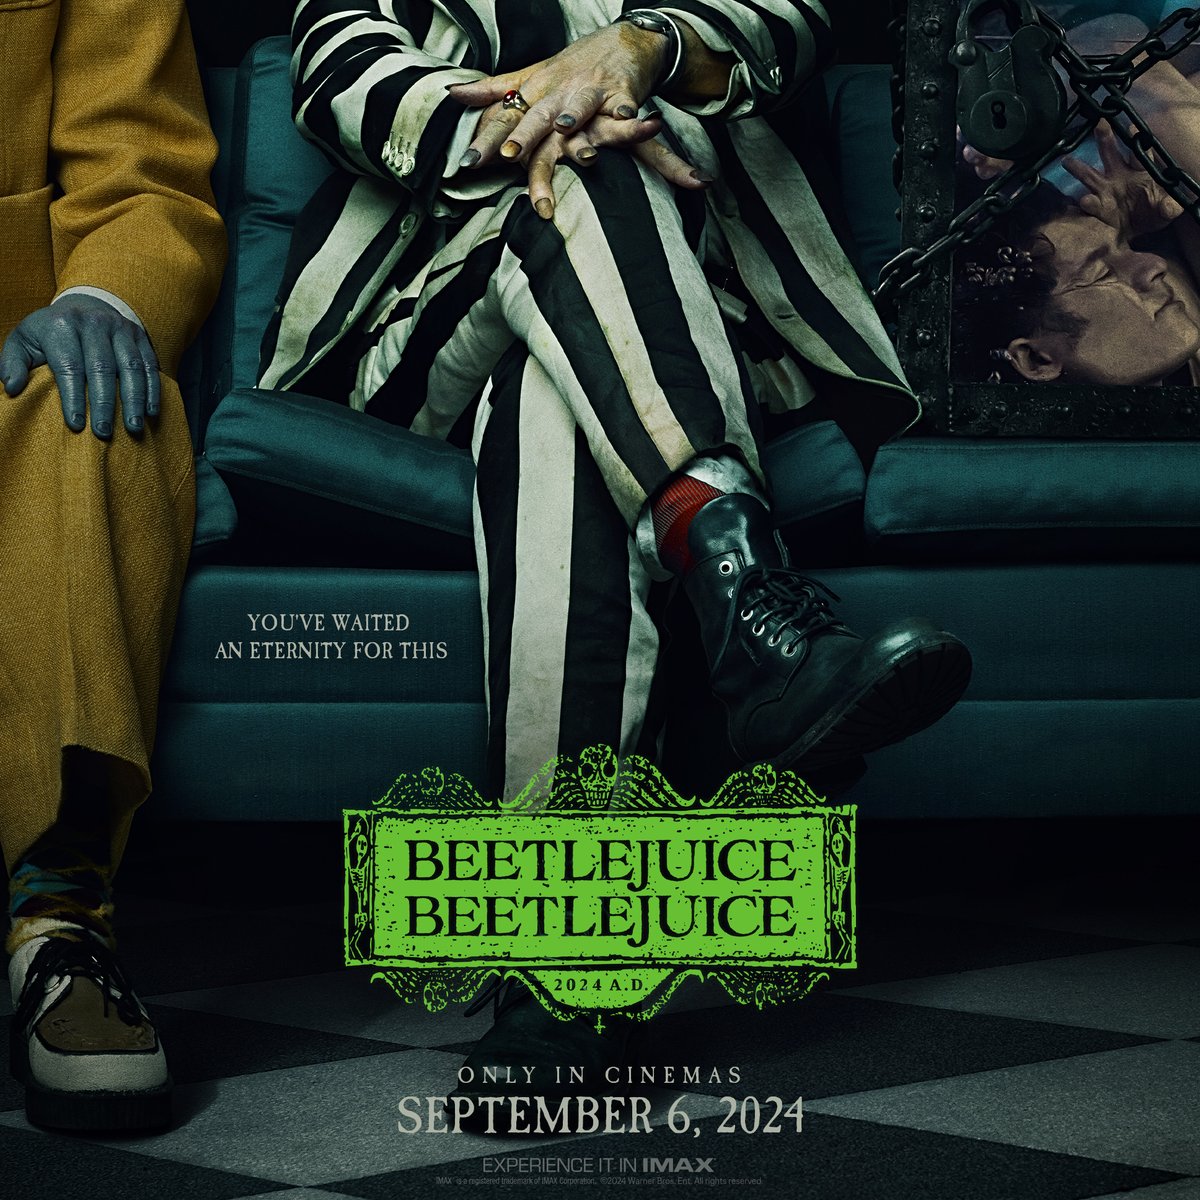 We saved a seat for you. Trailer Thursday. #Beetlejuice #Beetlejuice - Only in cinemas September 6.